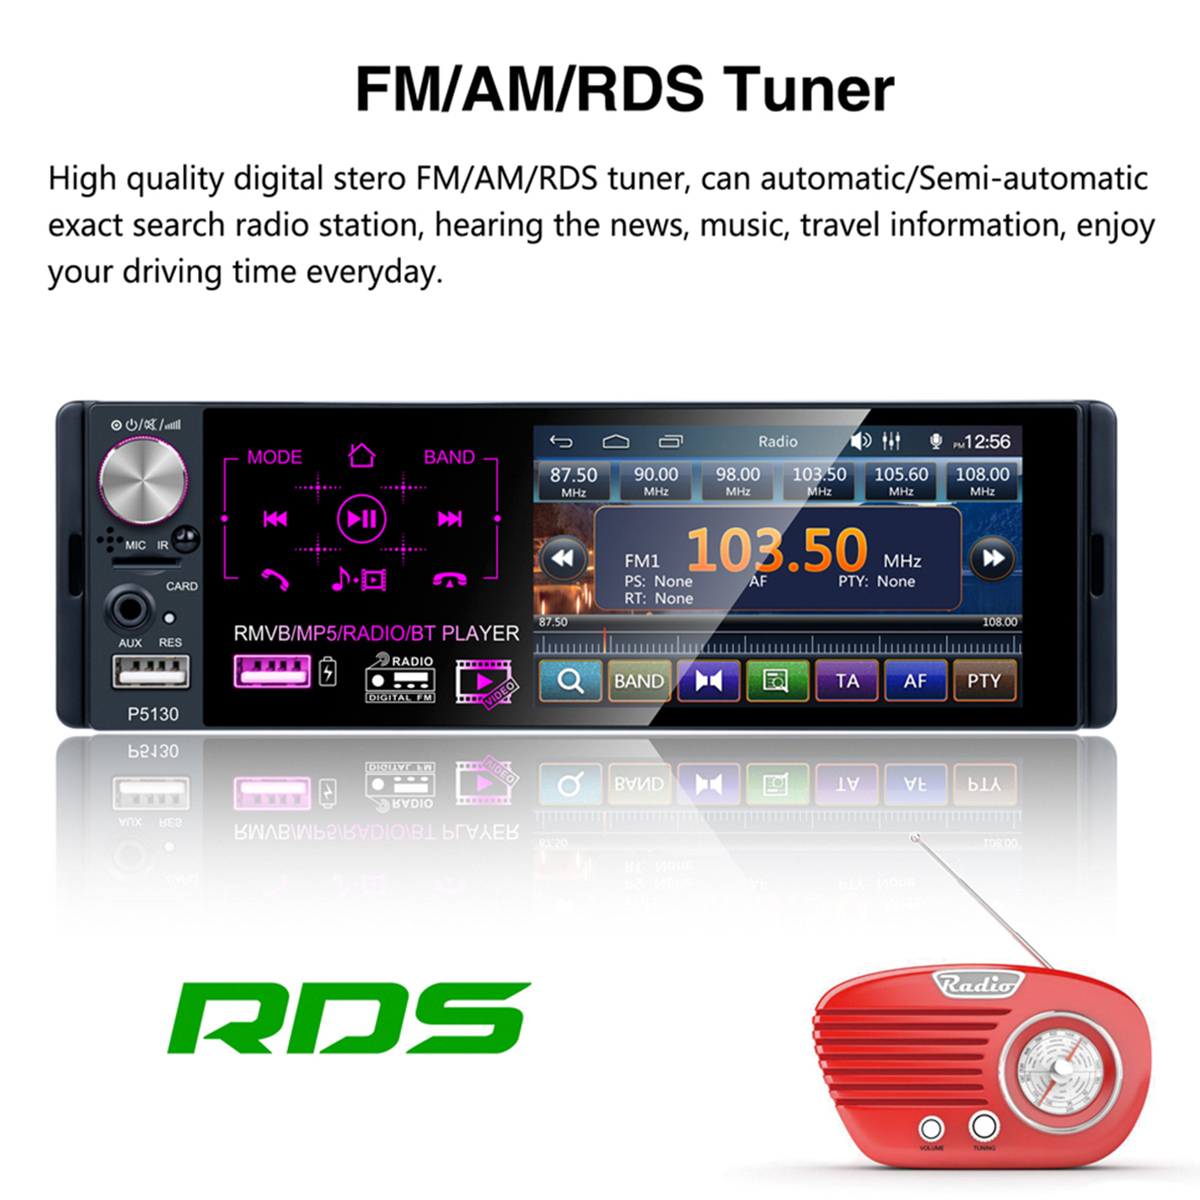 P5130-41-Inch-1-DIN-Car-Stereo-Radio-MP5-Player-Full-Touch-Screen-FM-AM-RDS-bluetooth-USB-Strong-Bas-1649564-3